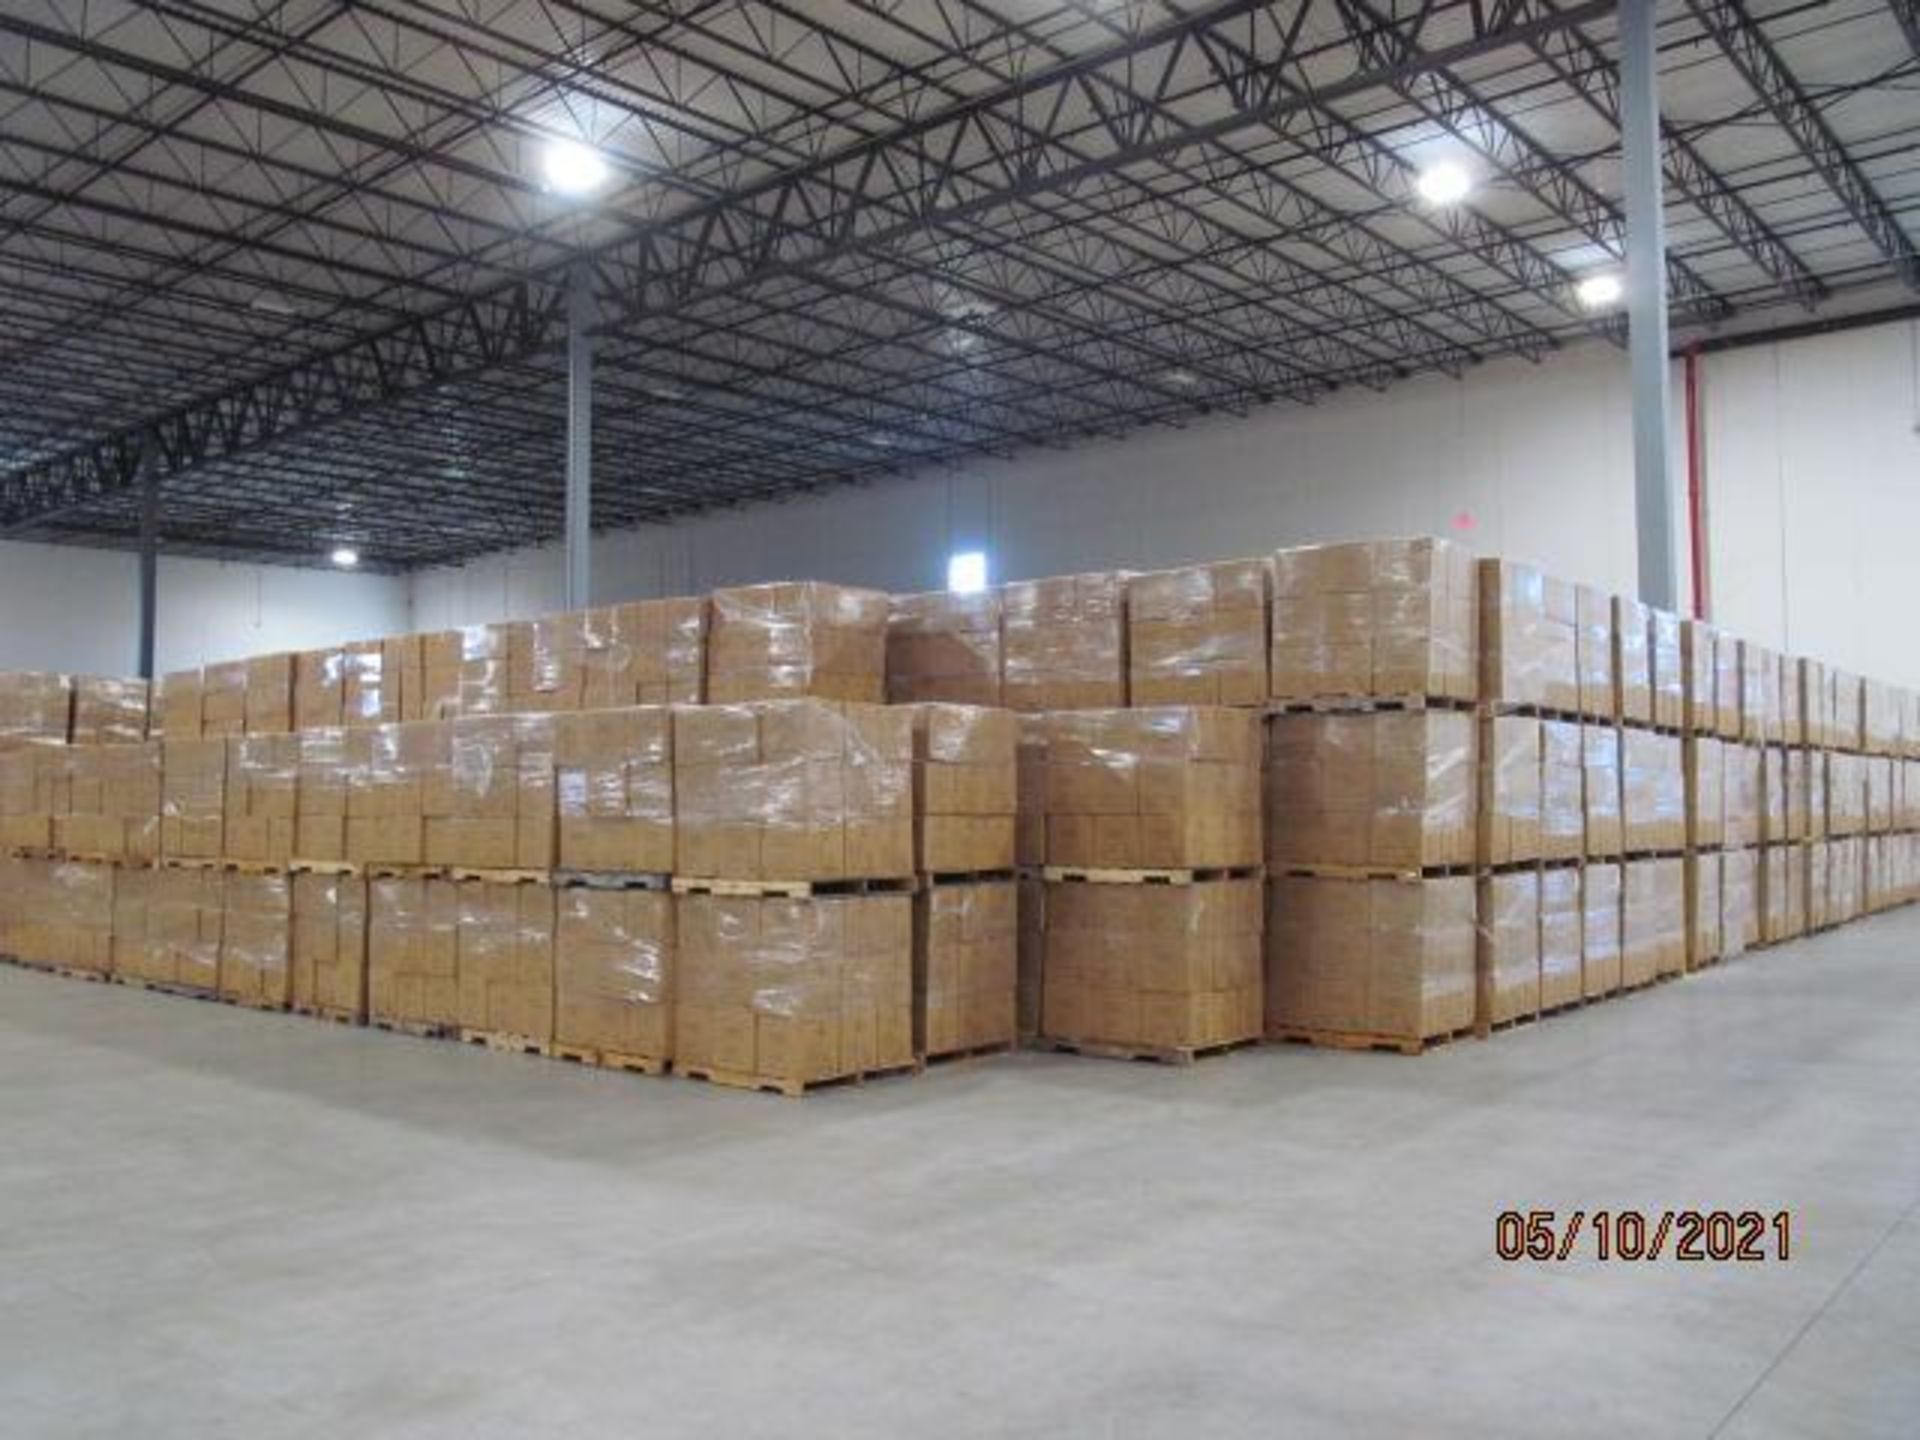 Lot of Waxman Kleen Freak Sanitizing Wipes consisting of 33,696 packages on 52 pallets. Each package - Image 11 of 11